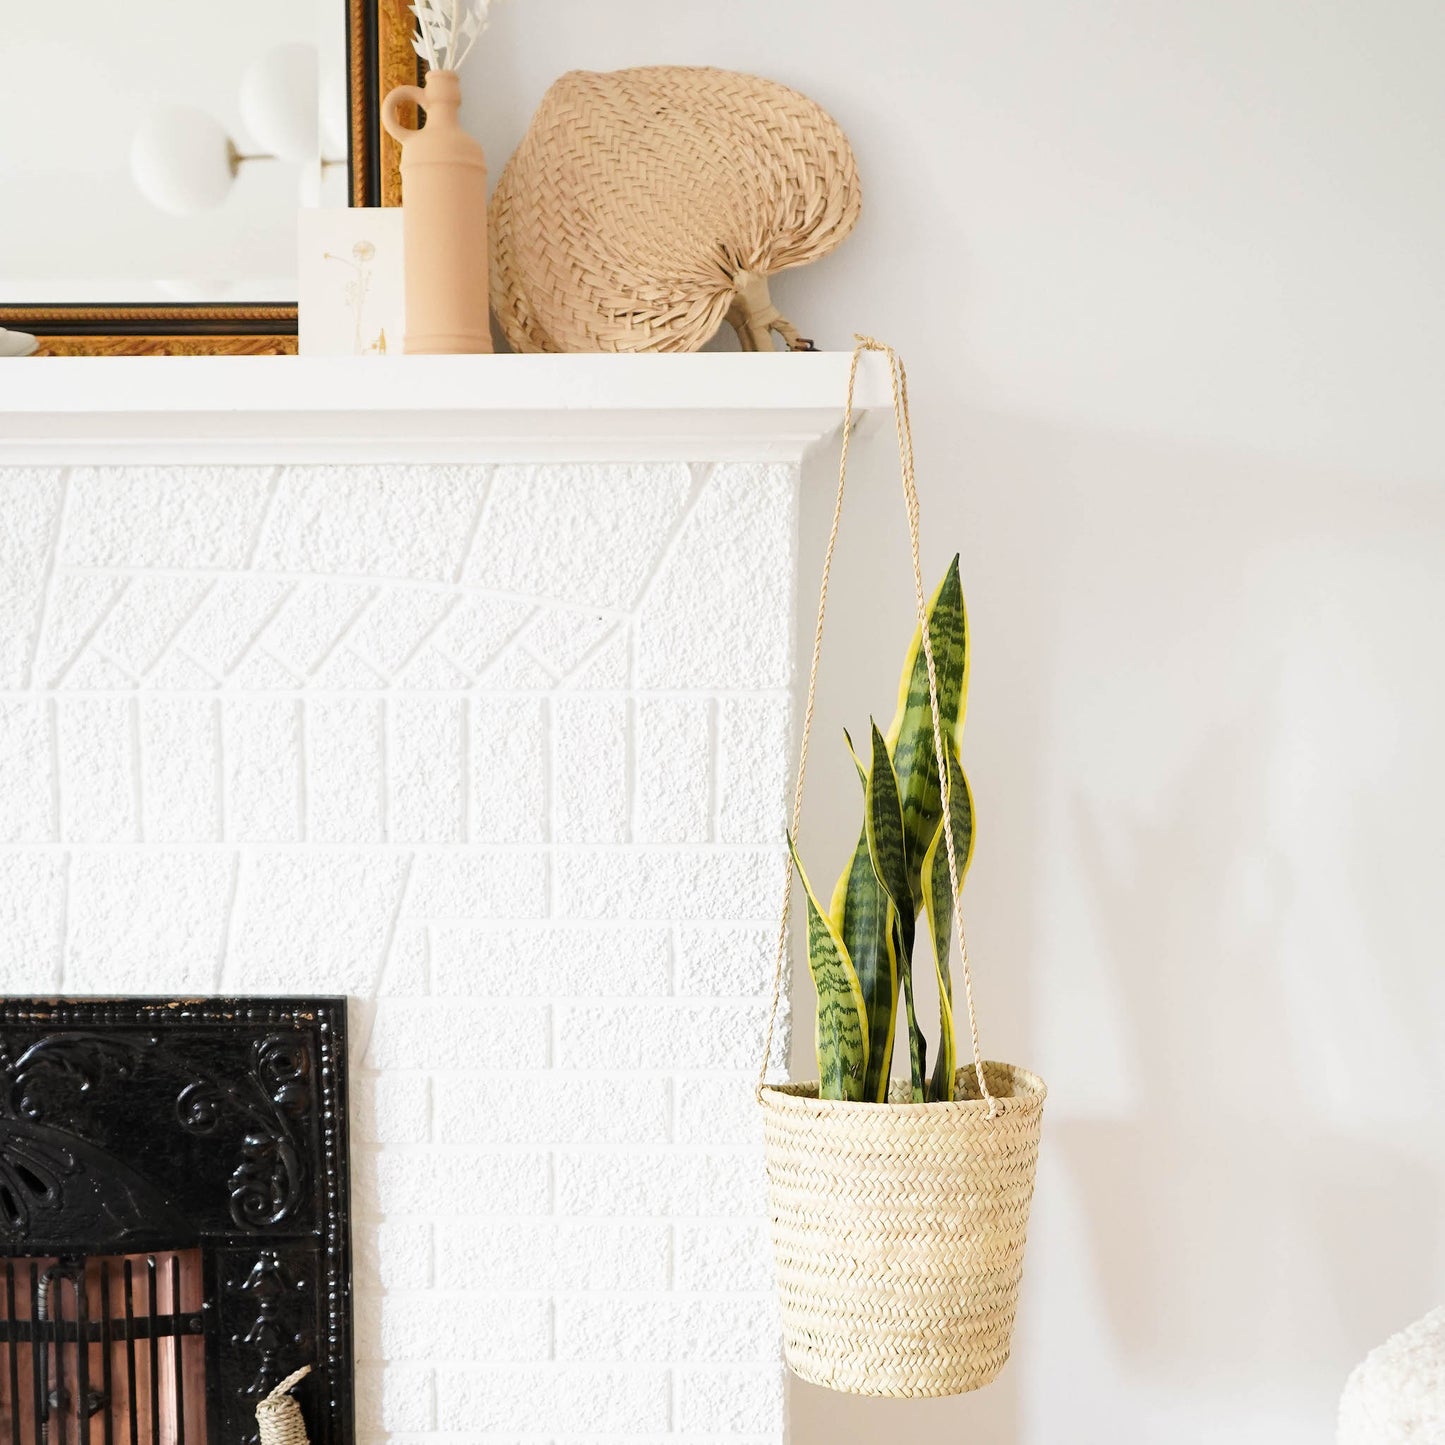 Straw planter holding a snake plant in front of a fireplace in a bright living room